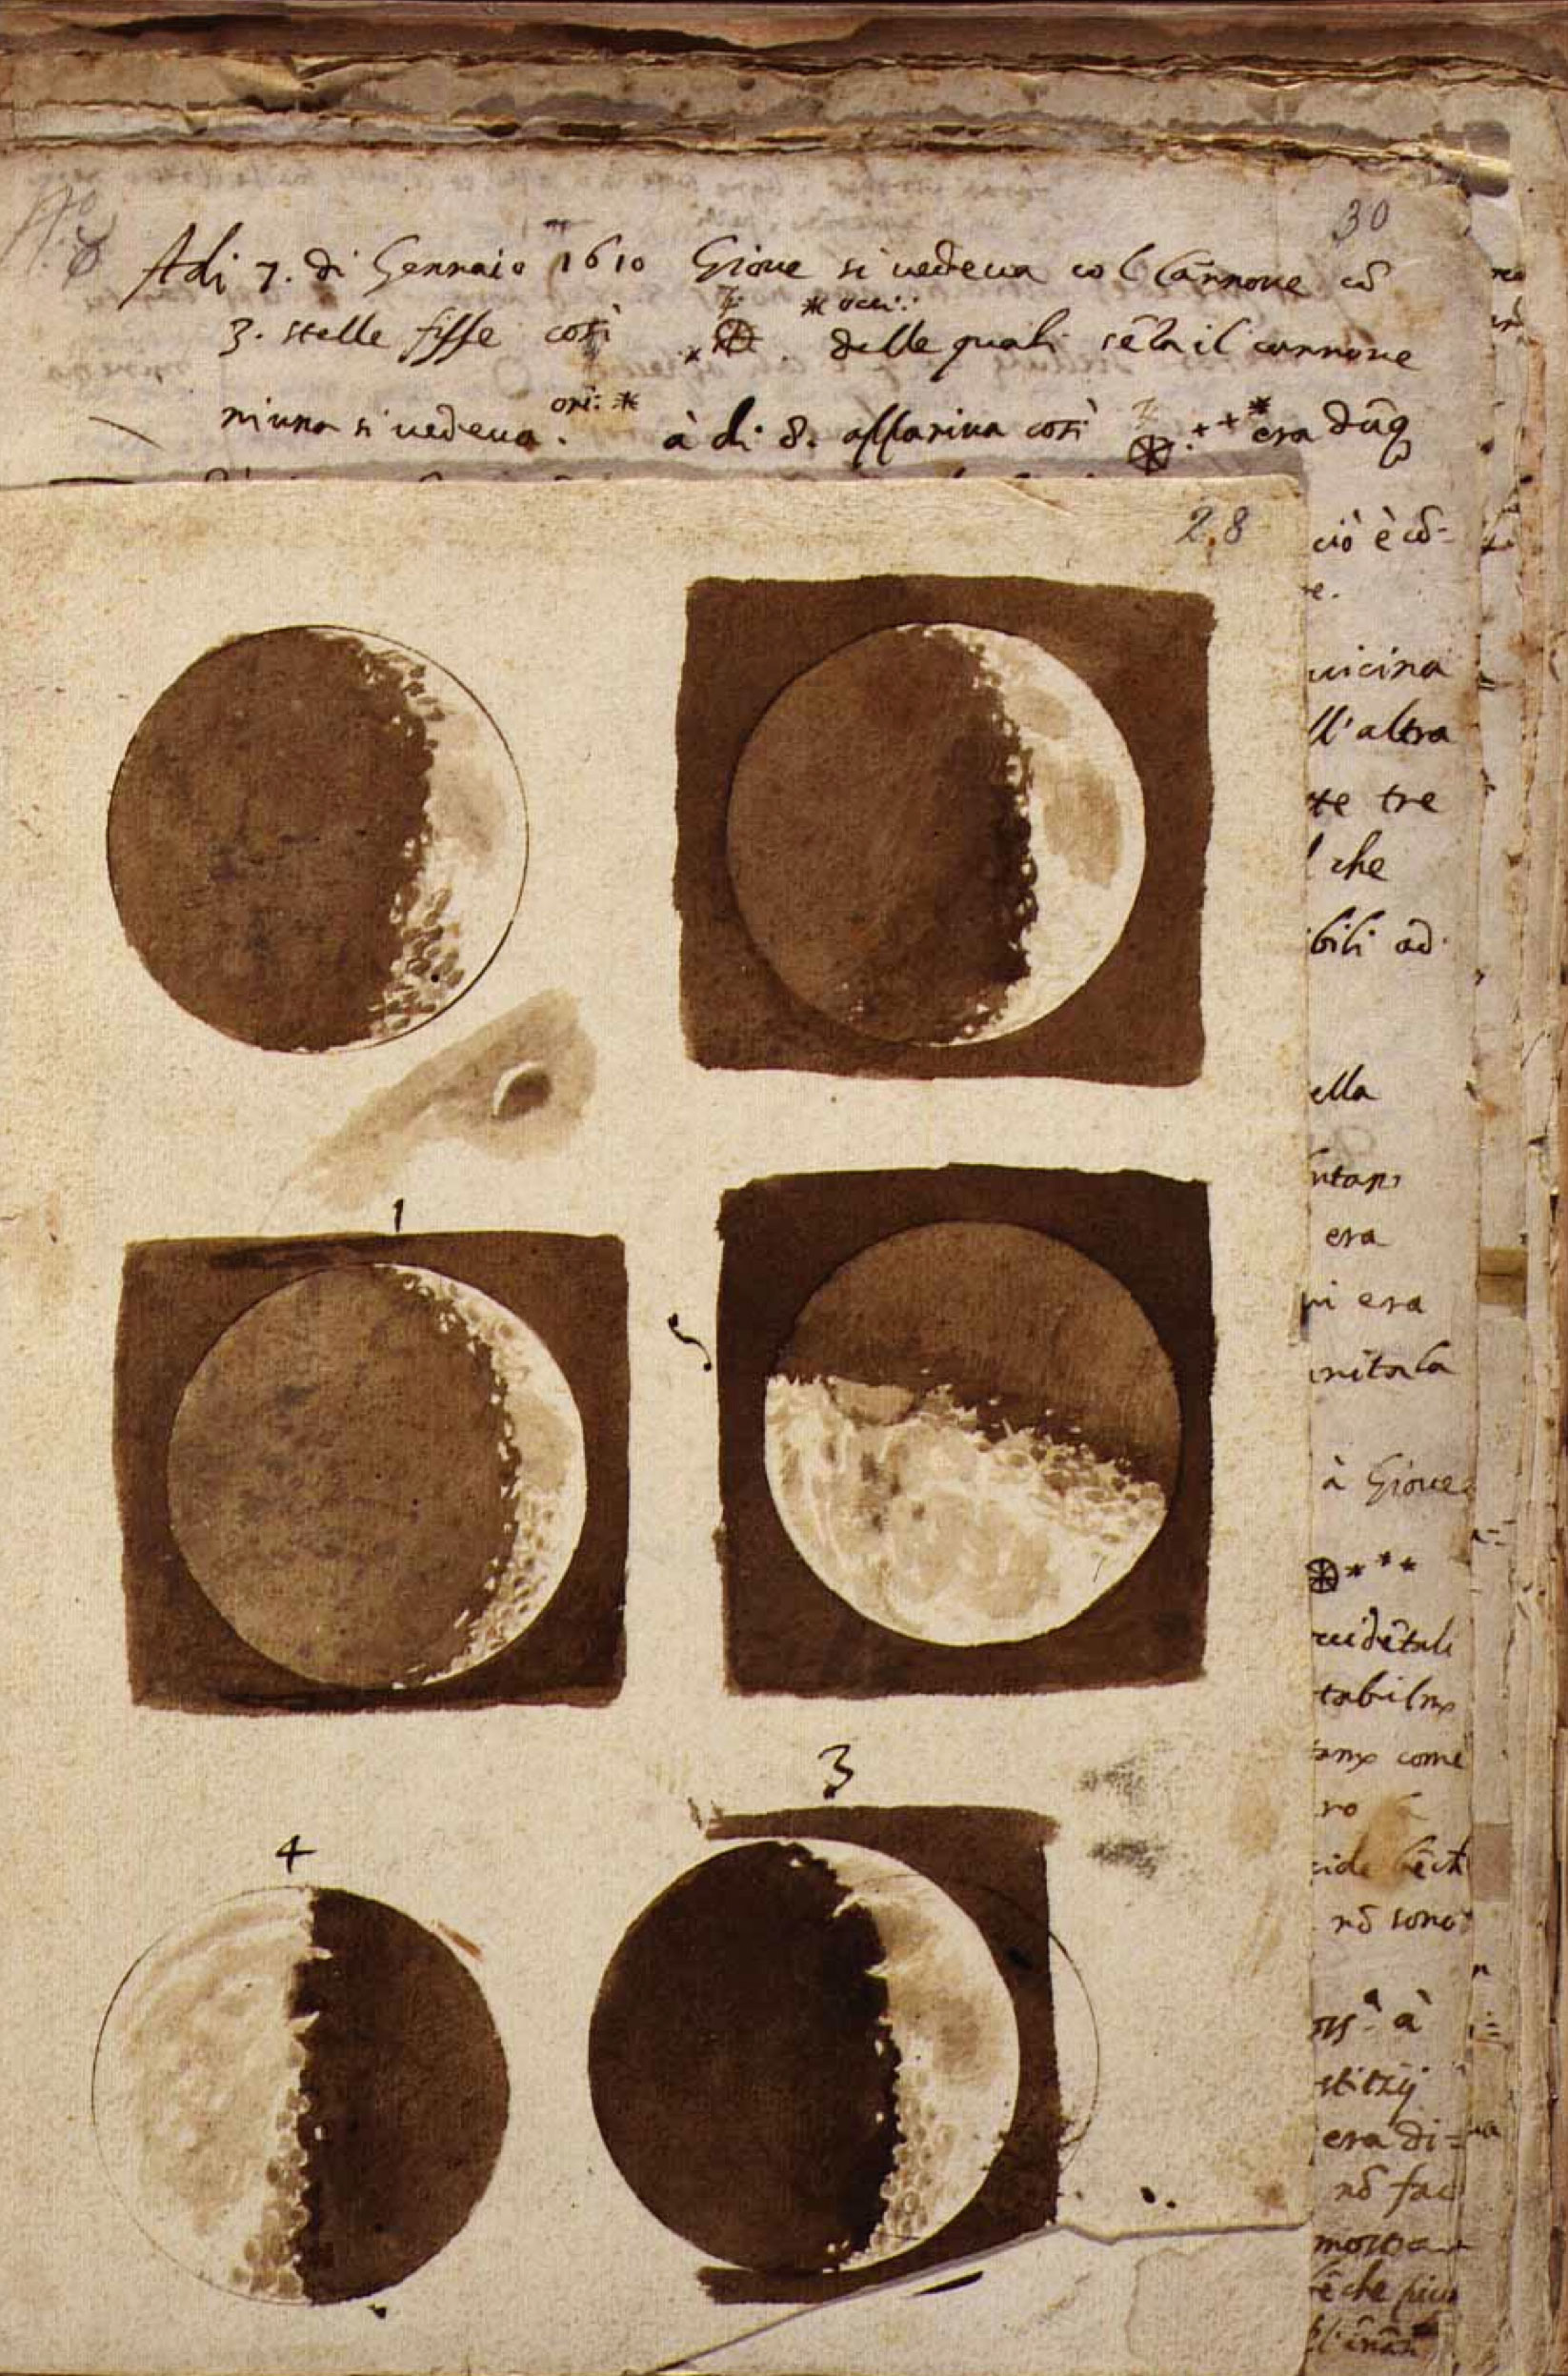 The moon, 1609, by Galileo Galilei. As reproduced in Universe